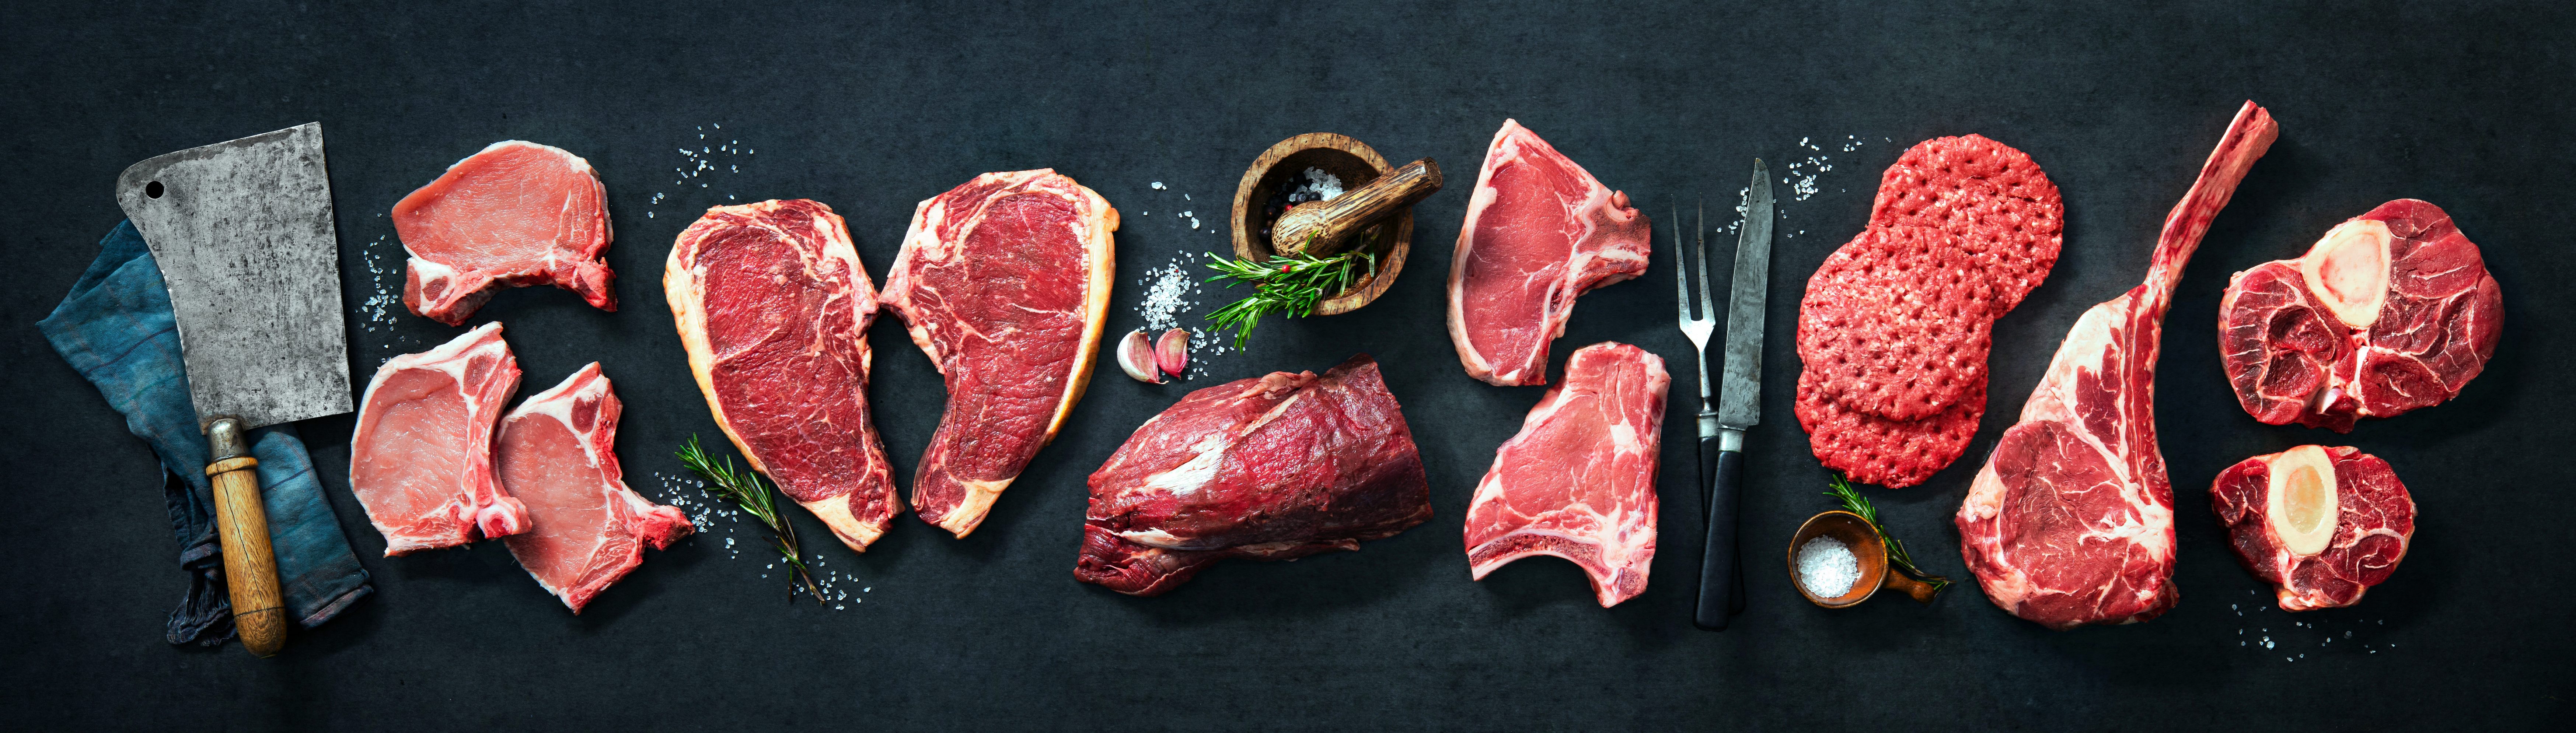 Assortment,Of,Raw,Cuts,Of,Meat,,Dry,Aged,Beef,Steaks